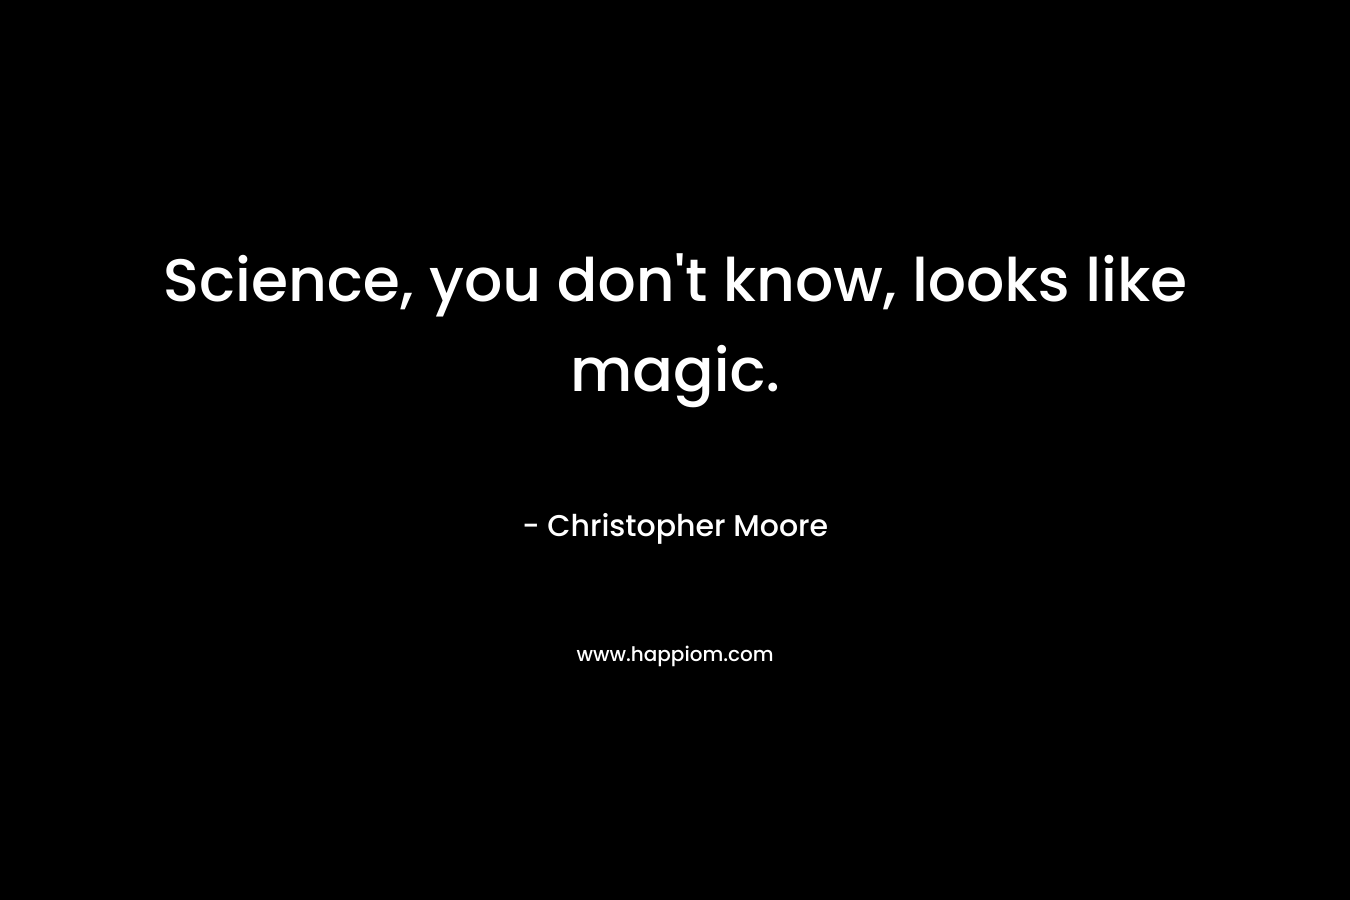 Science, you don't know, looks like magic.